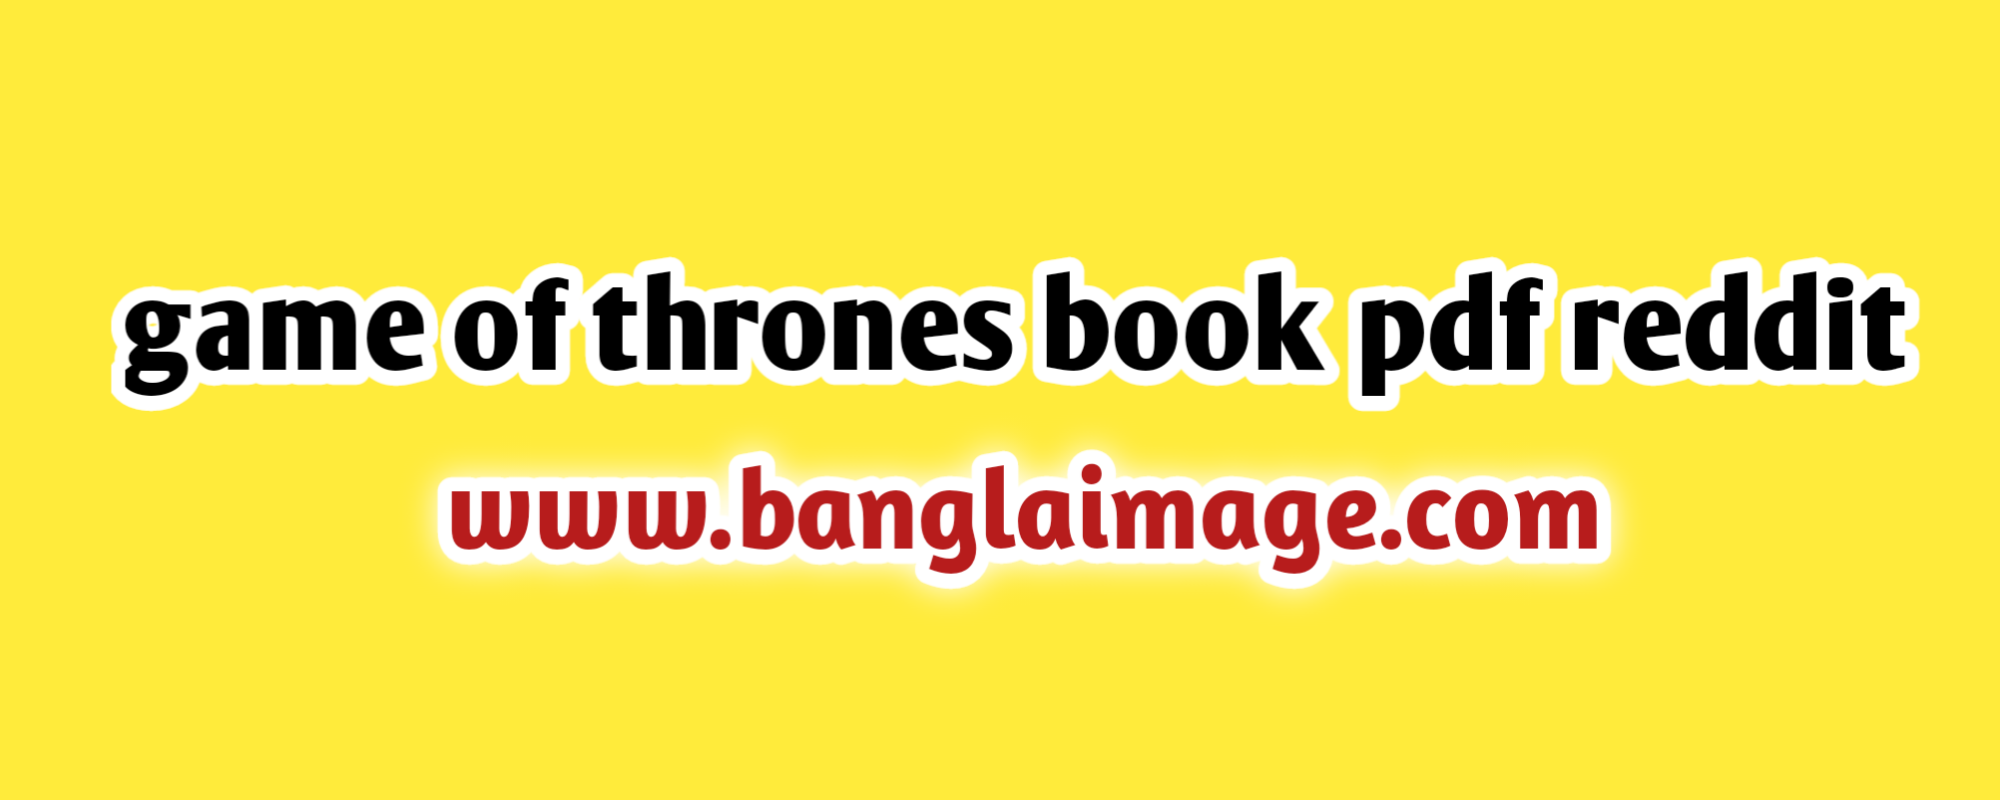 game of thrones book pdf reddit, how to download ebooks reddit free, download mobi books reddit, the how to download ebooks reddit free